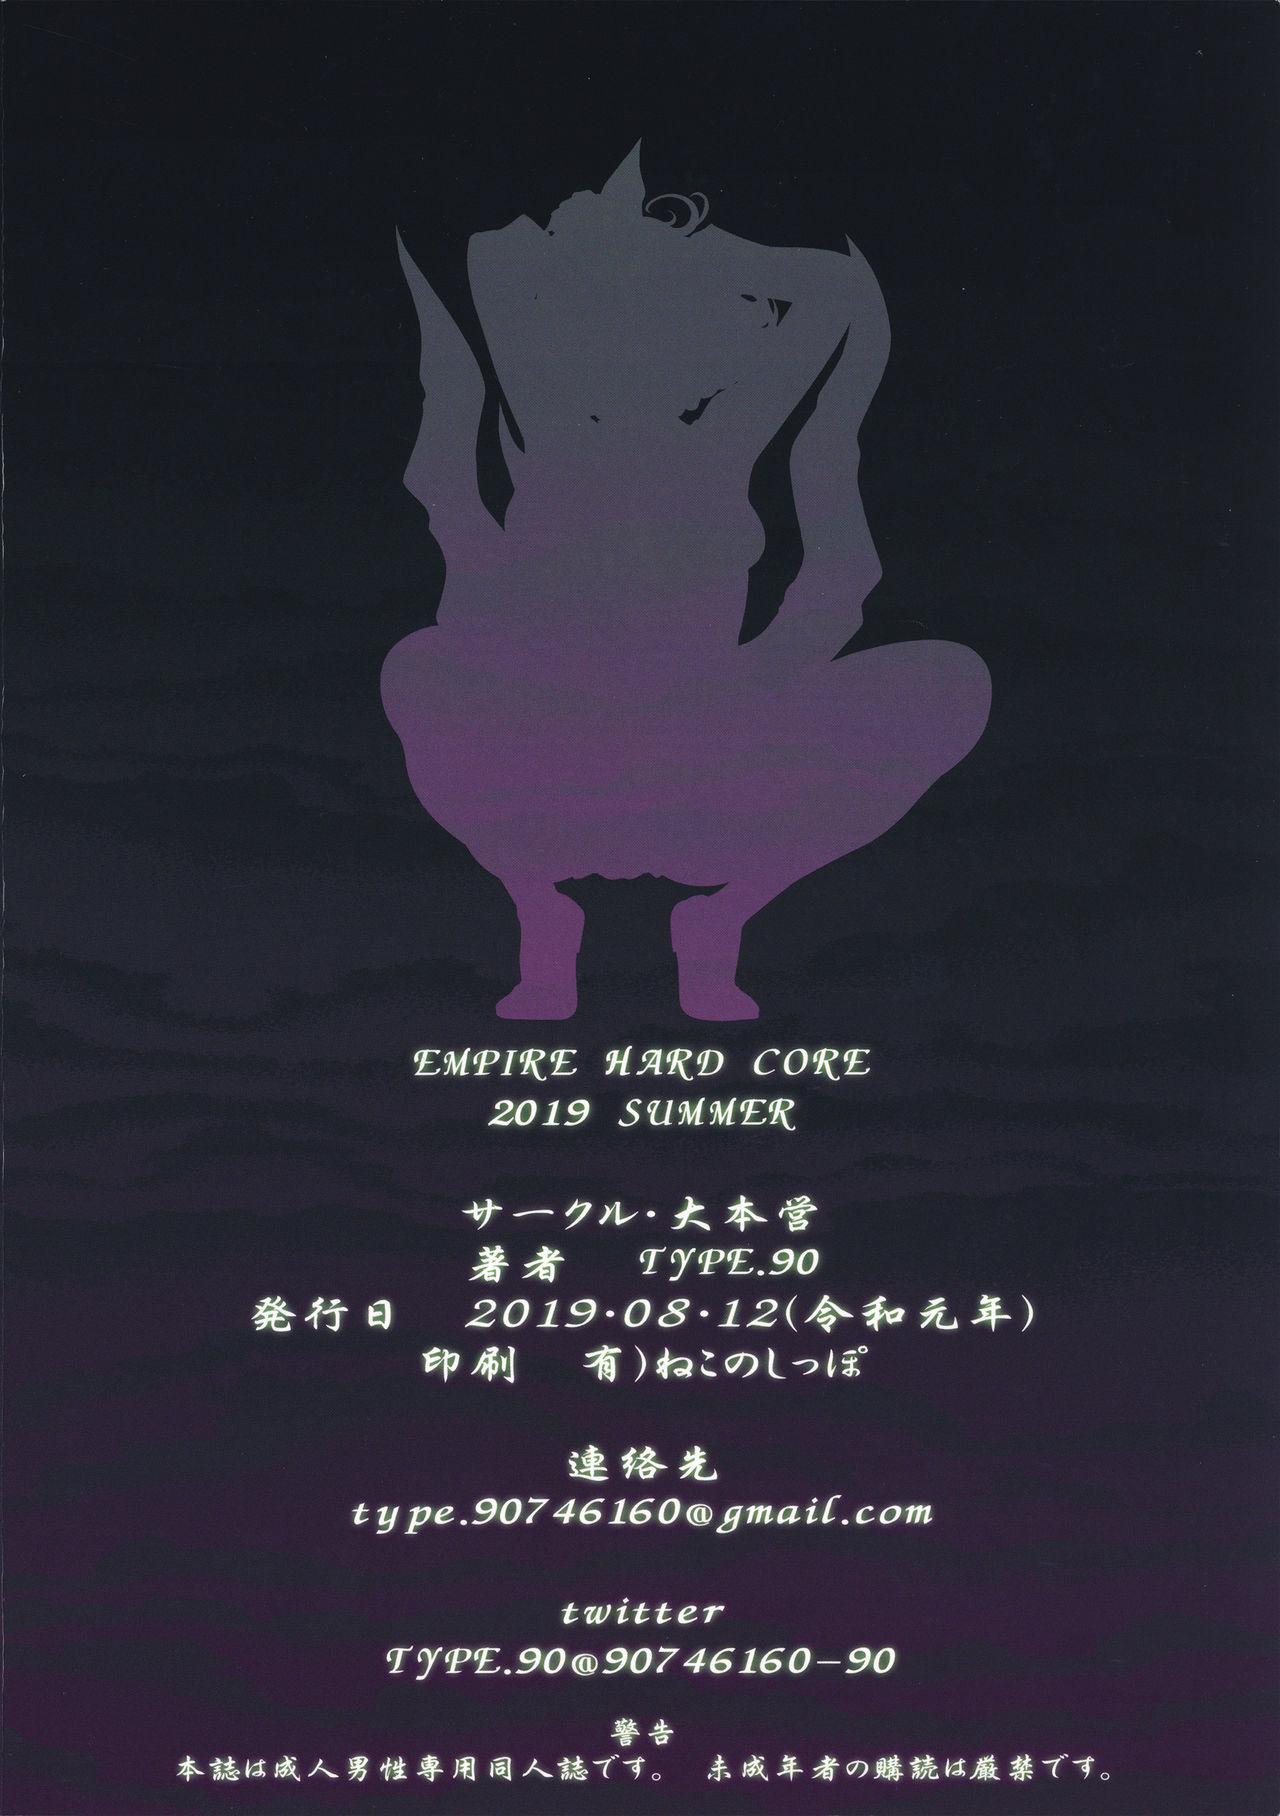 Chupa EMPIRE HARD CORE 2019 SUMMER - One punch man Perfect Body - Page 26